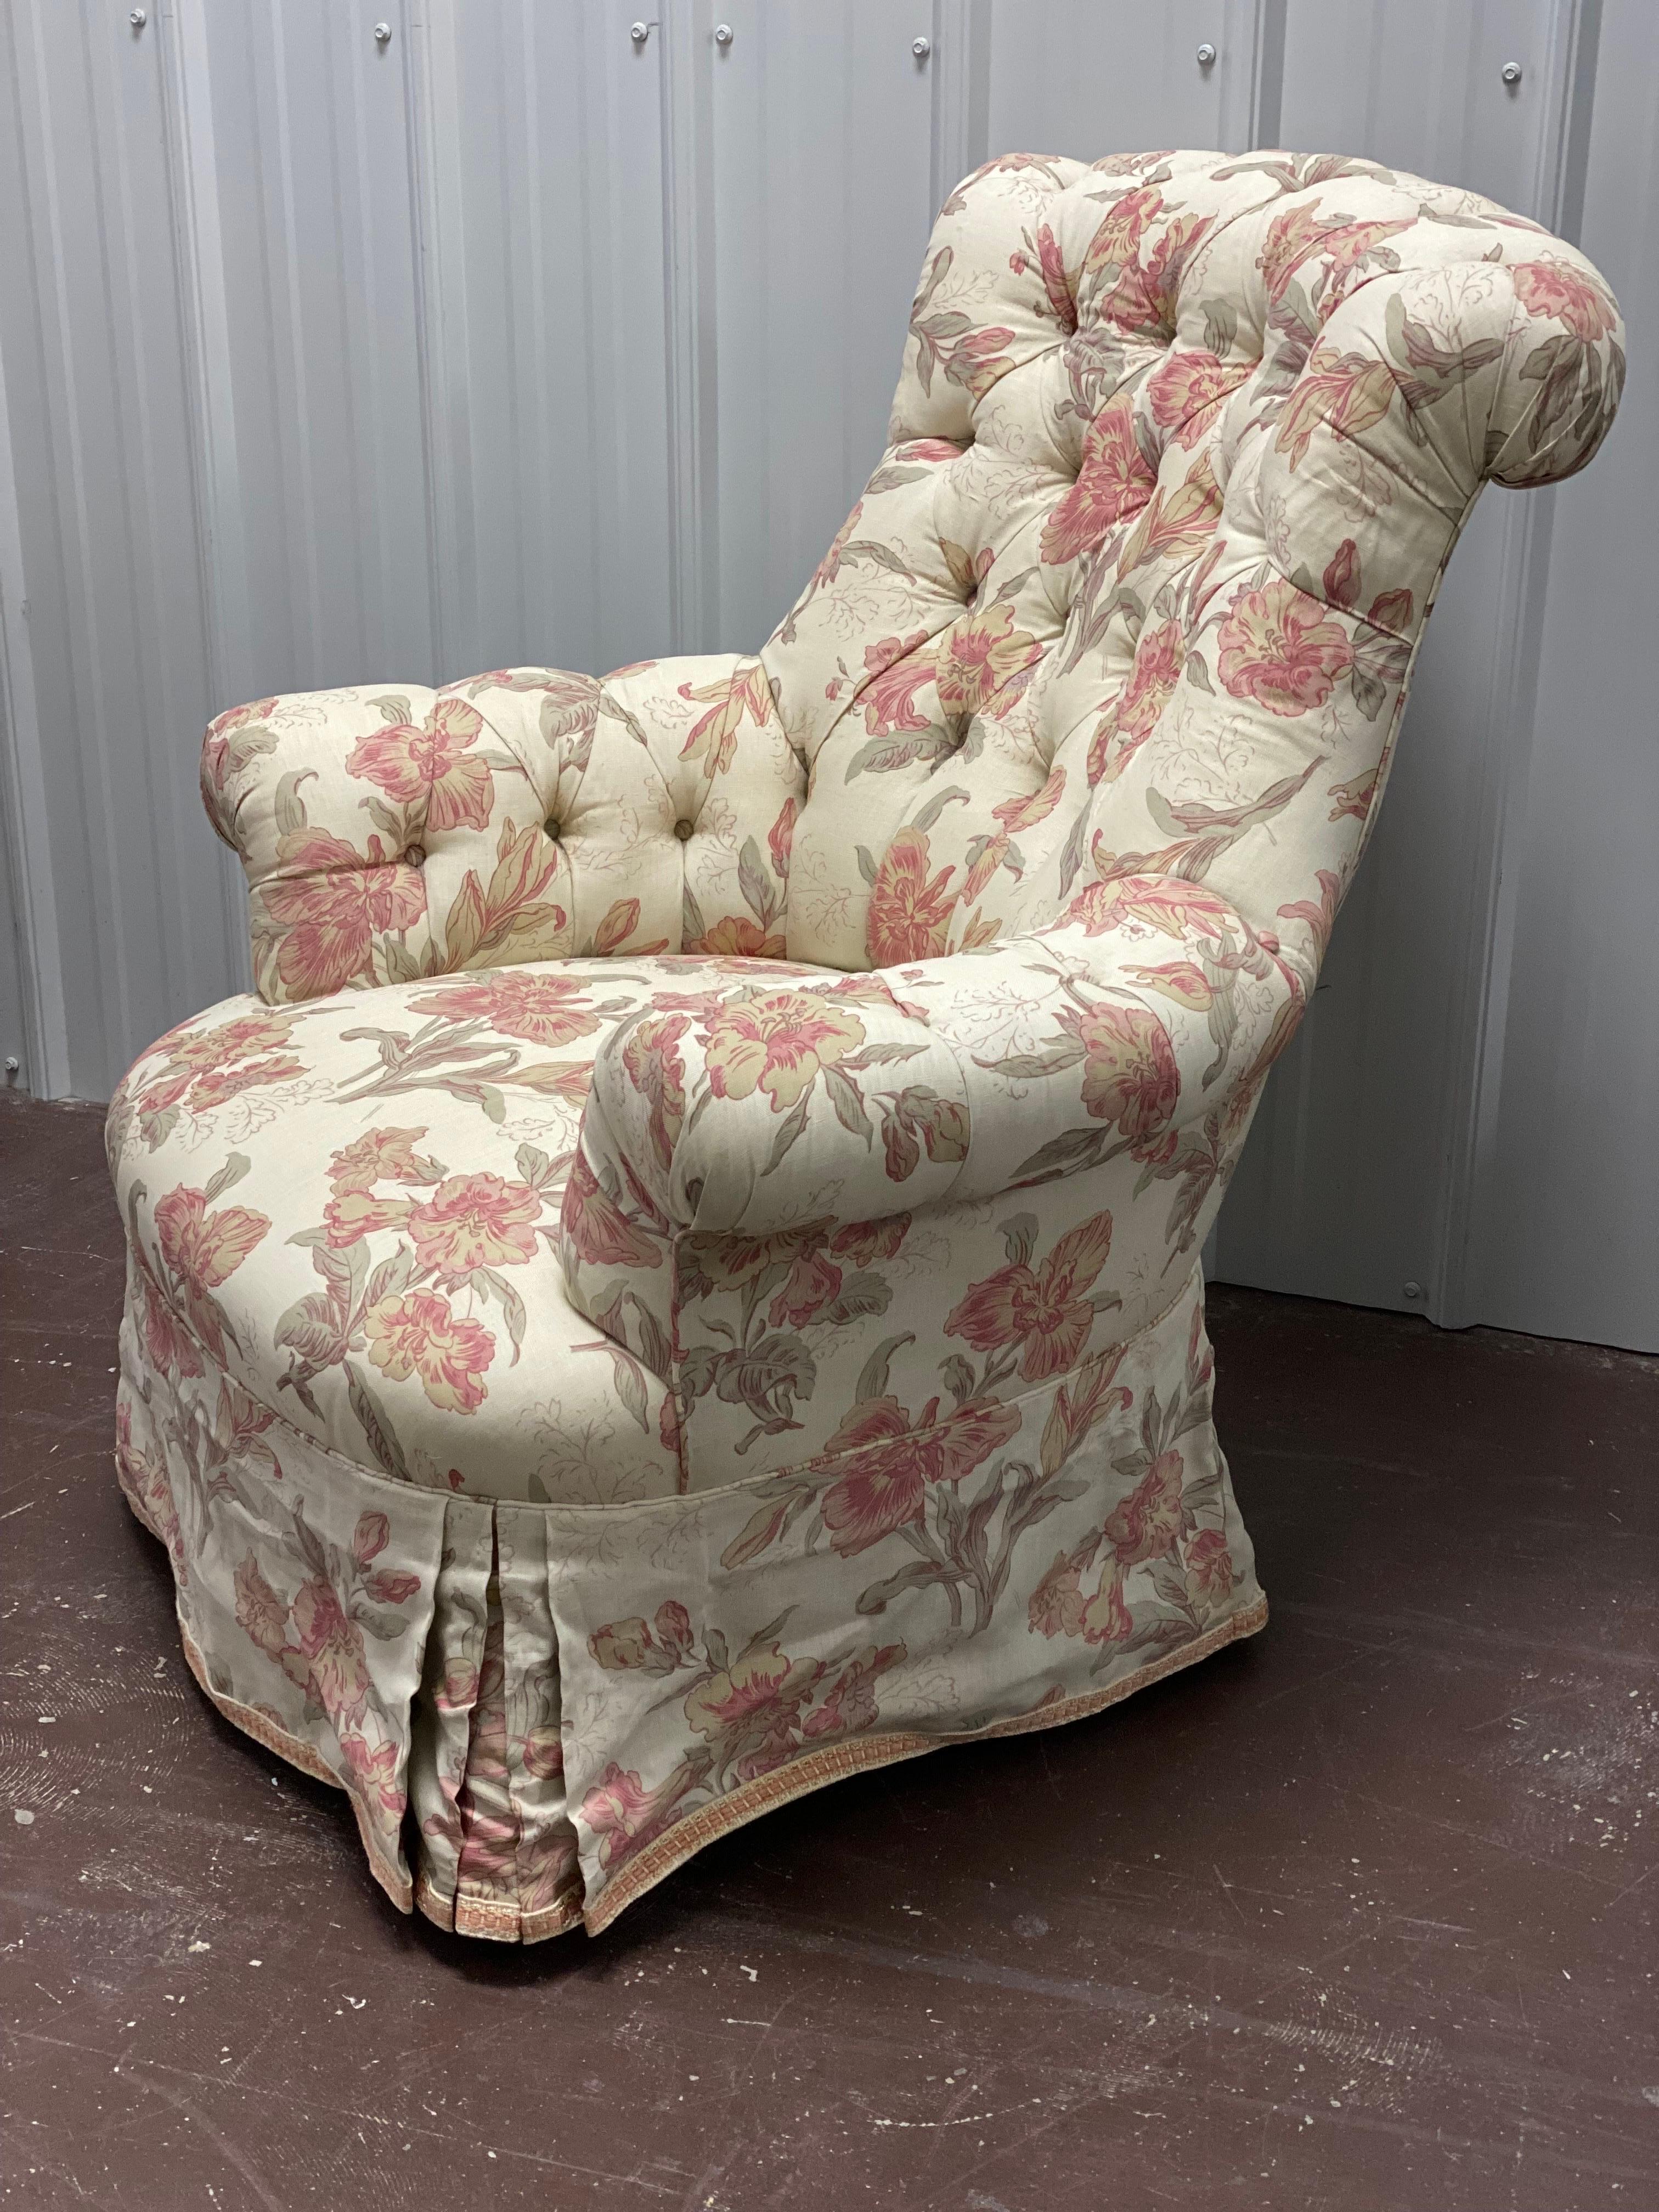 Tufted Rounded Back Armchair designed by Parish-Hadley.
A classic form in the floral linen. Chair designed by Parish-Hadley. Tufted, Rolled-back and arms, tight seat with straight skirt, pleated at corners. Tape trim applied along base of skirt.